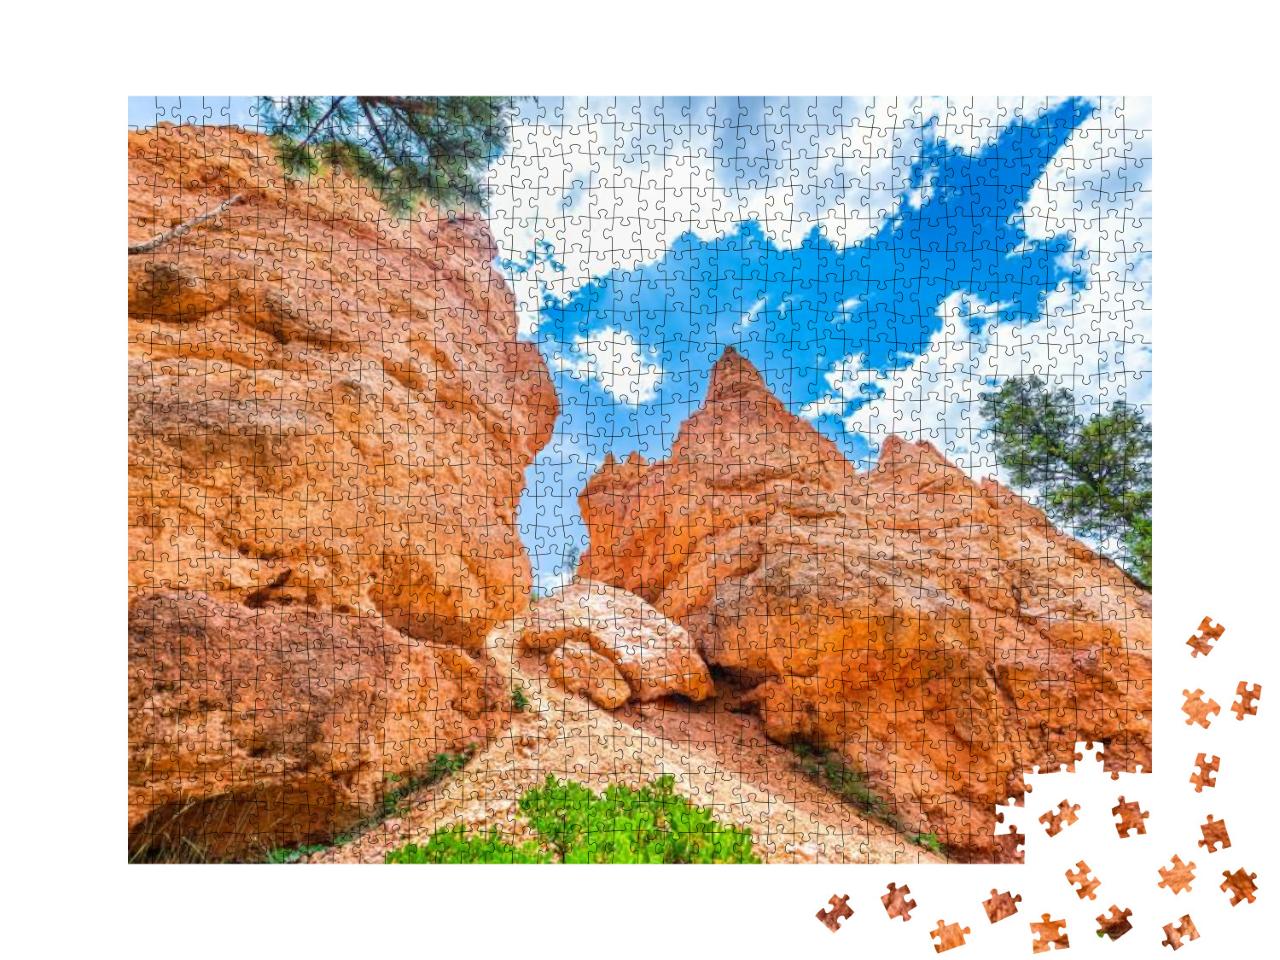 Queens Garden Navajo Loop Hiking Trail At Bryce C... Jigsaw Puzzle with 1000 pieces